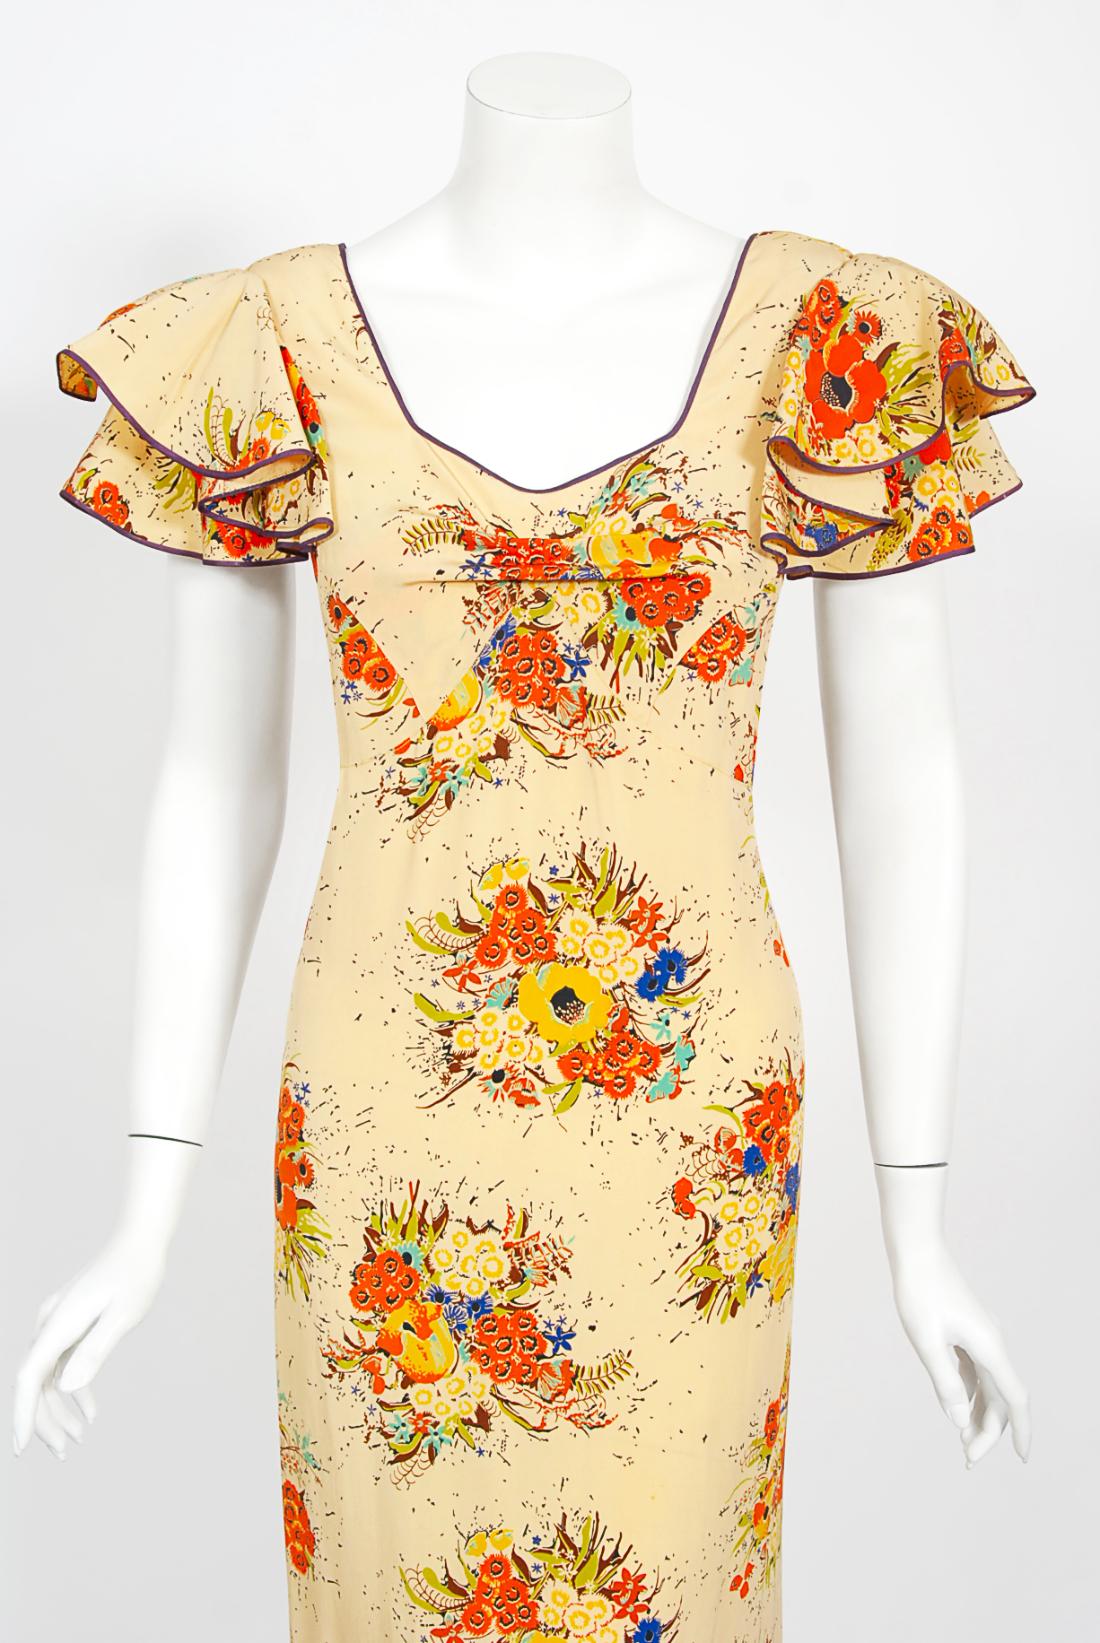 The vibrant marigold floral garden print used on this 1930's 'Ryder's of Philadelphia' designer silk maxi dress has a fresh innocence that I find irresistible. The bodice has a fantastic low-cut front with tiered short flutter-sleeves. I especially